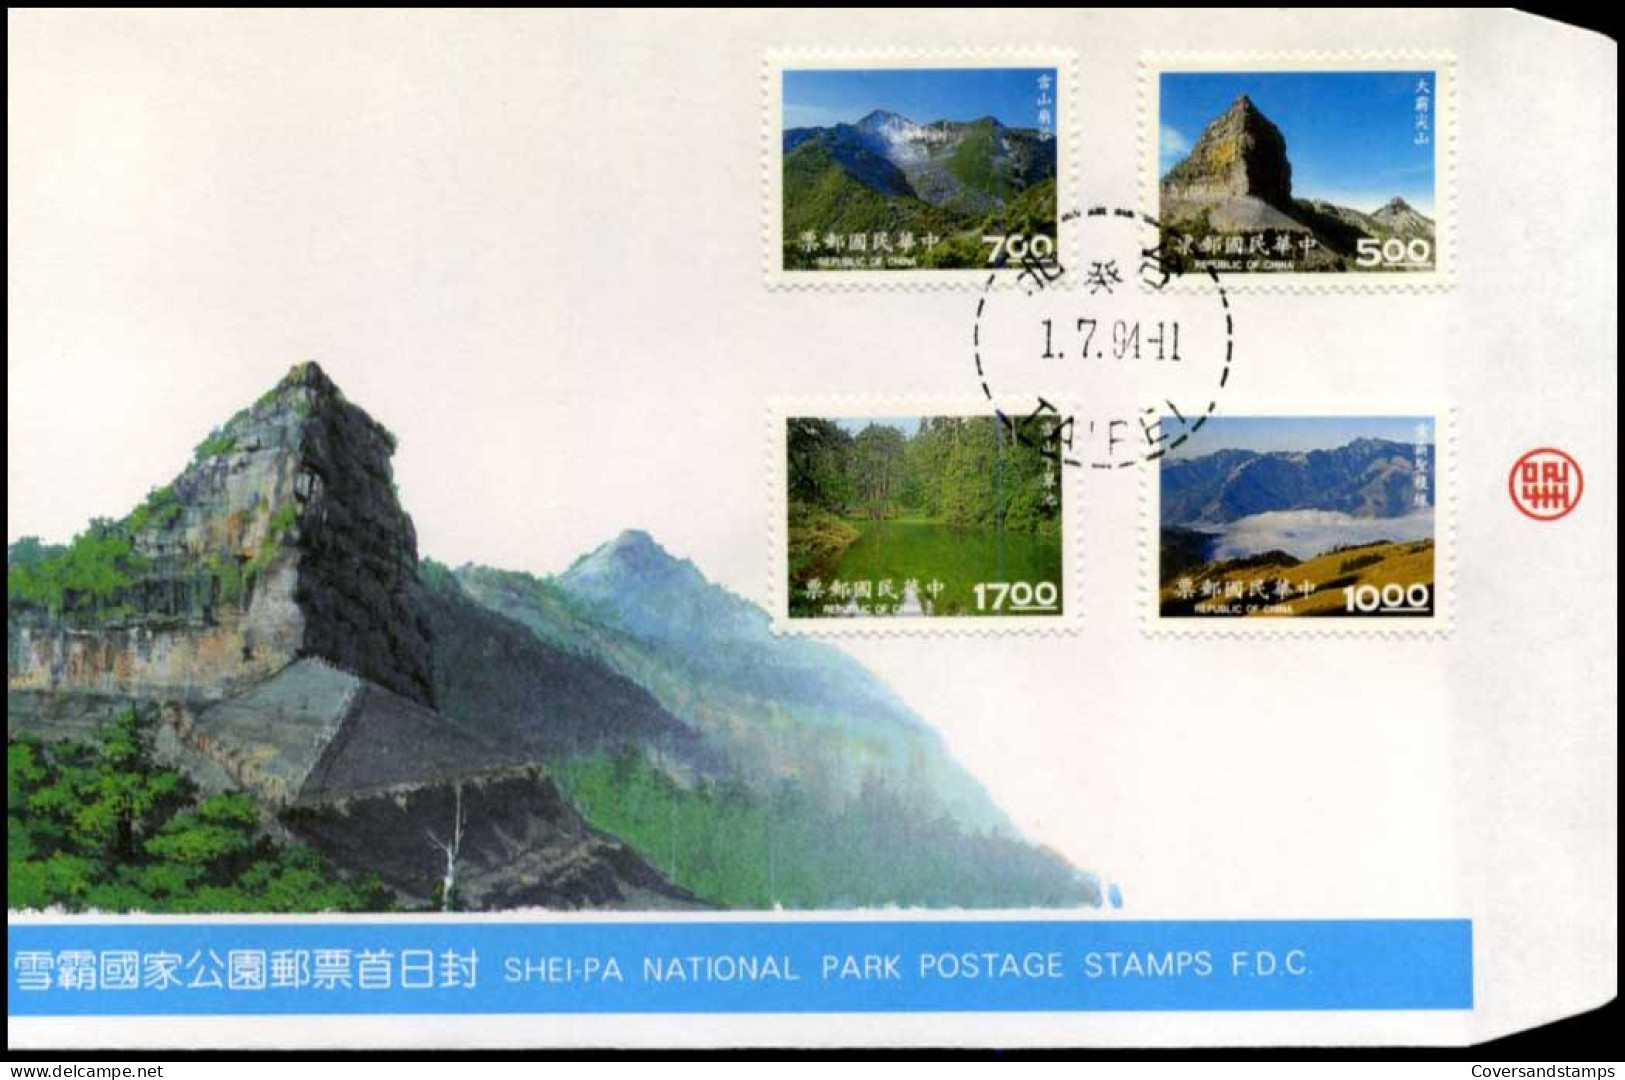 Taiwan - FDC - Shei-Pa National Park Postage Stamps - FDC